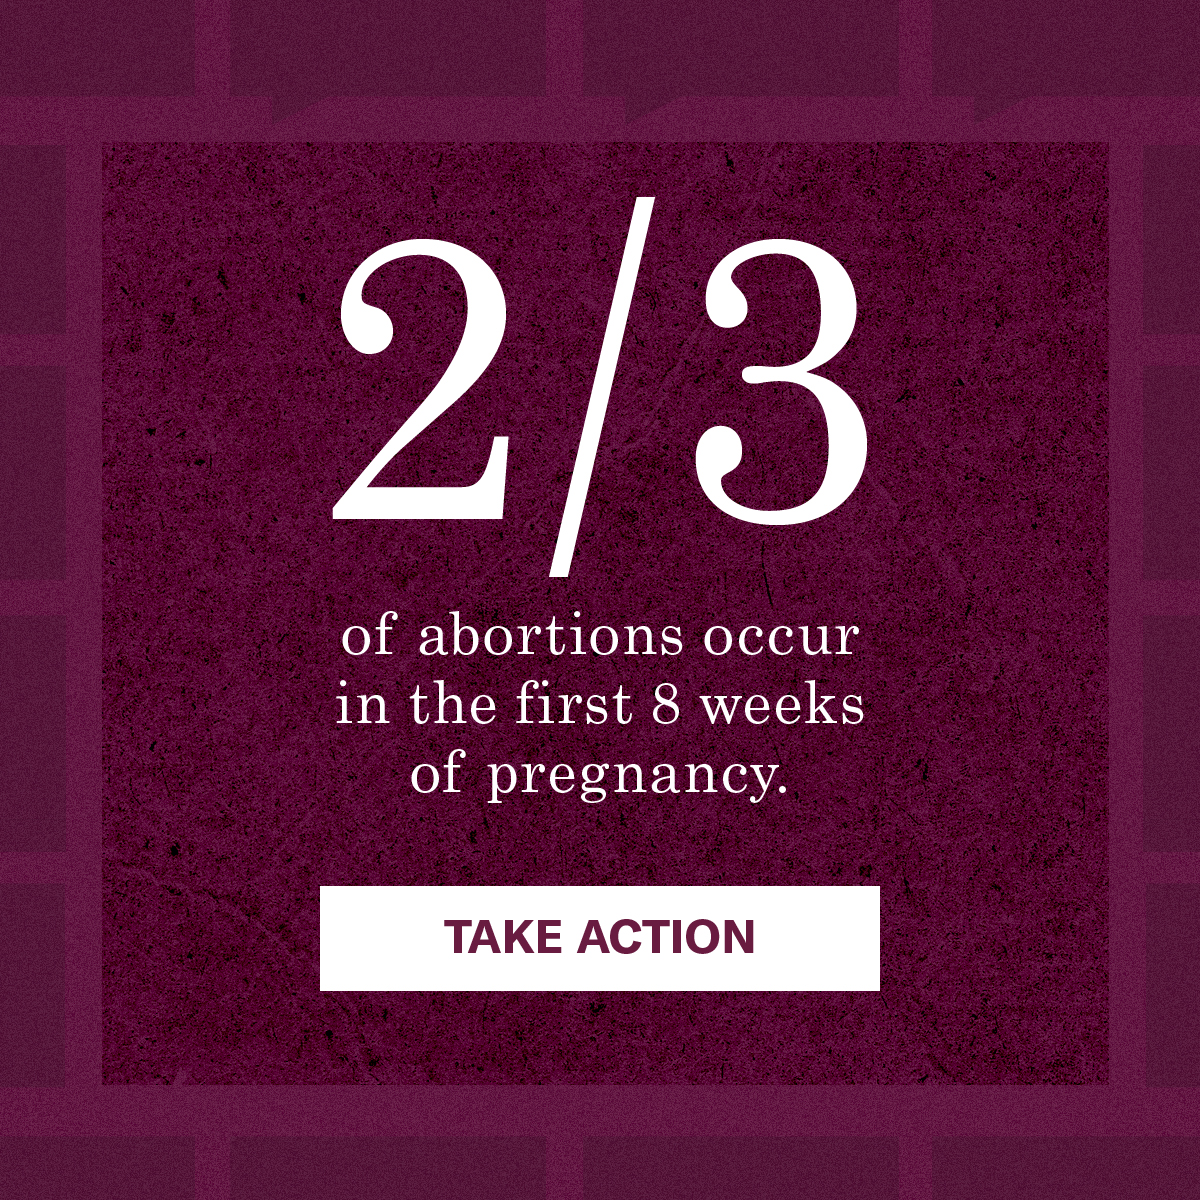 Two-thirds of abortions occur in the first 8 weeks of pregnancy.